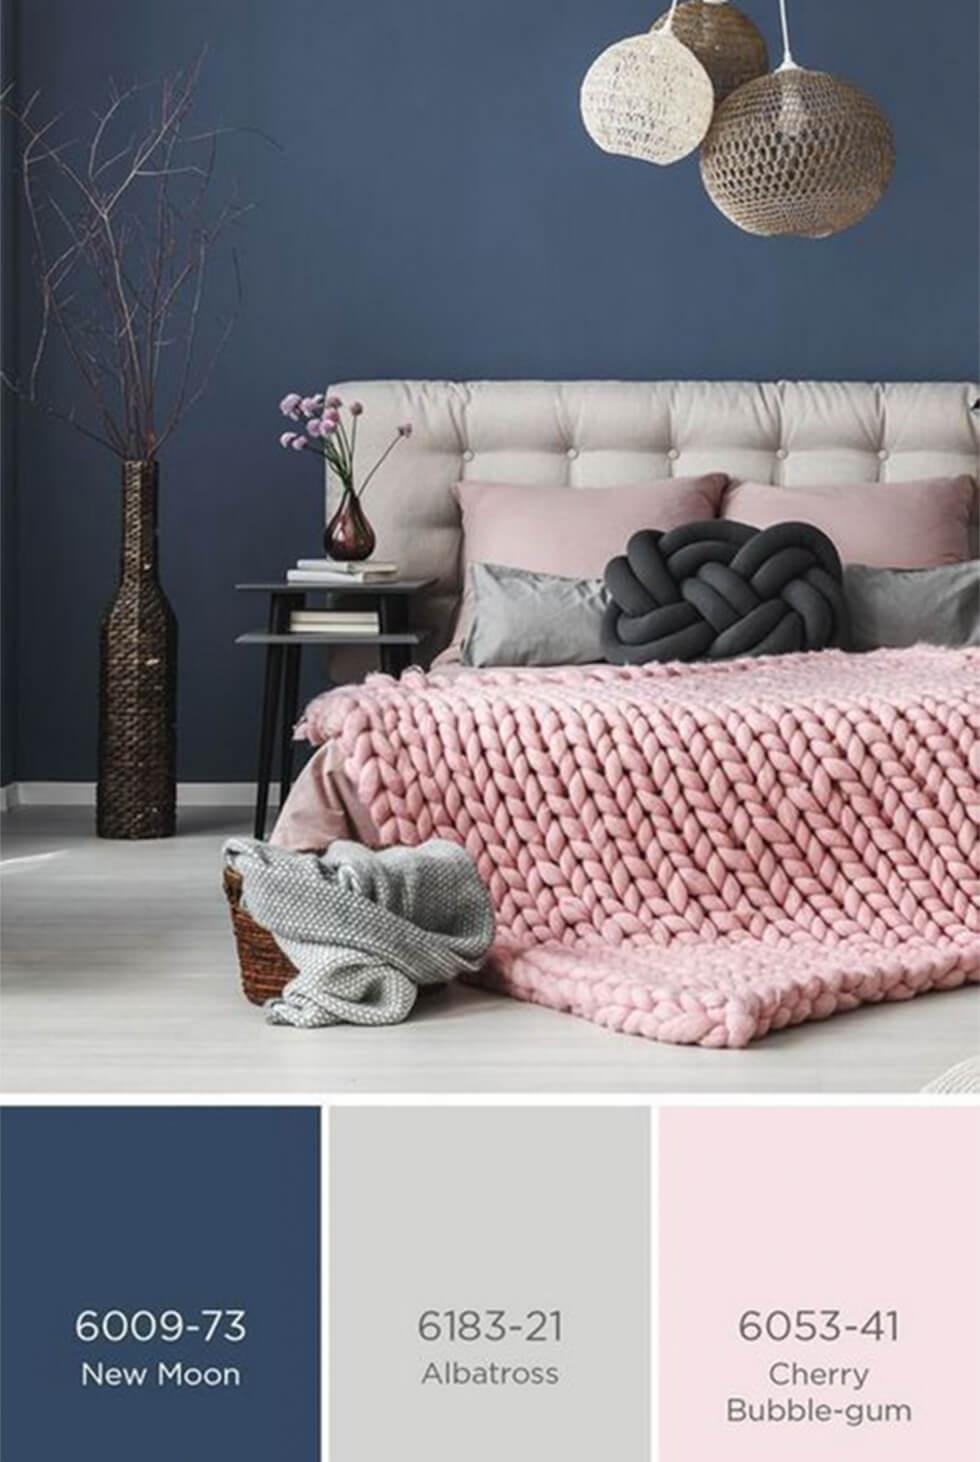 A contemporary blue bedroom with grey and light pink pastel hues